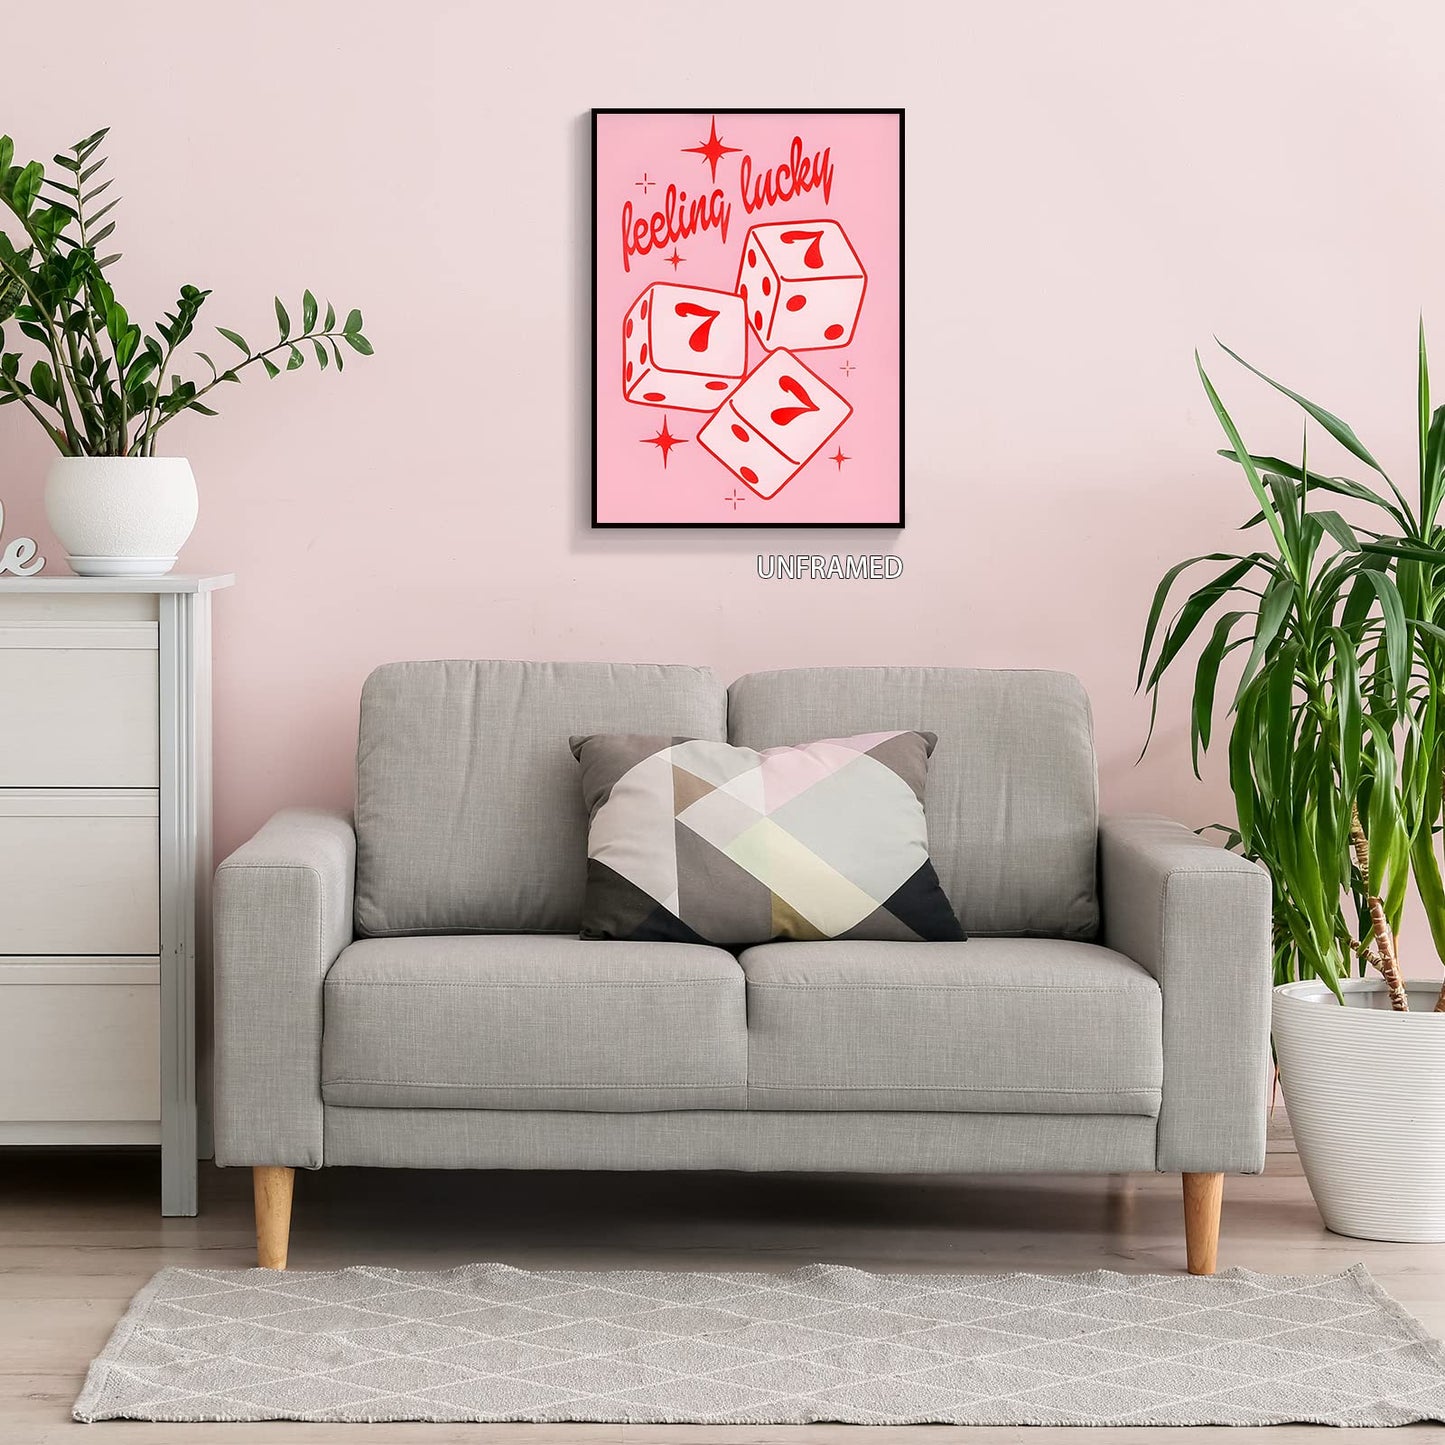 Cmoqtiv pink lucky Lucky number 7 dice aesthetic posters funny preppy playing card canvas wall art game room prints painting retro trendy modern wall decor for teen girl bedroom dorm 12x16in unframed